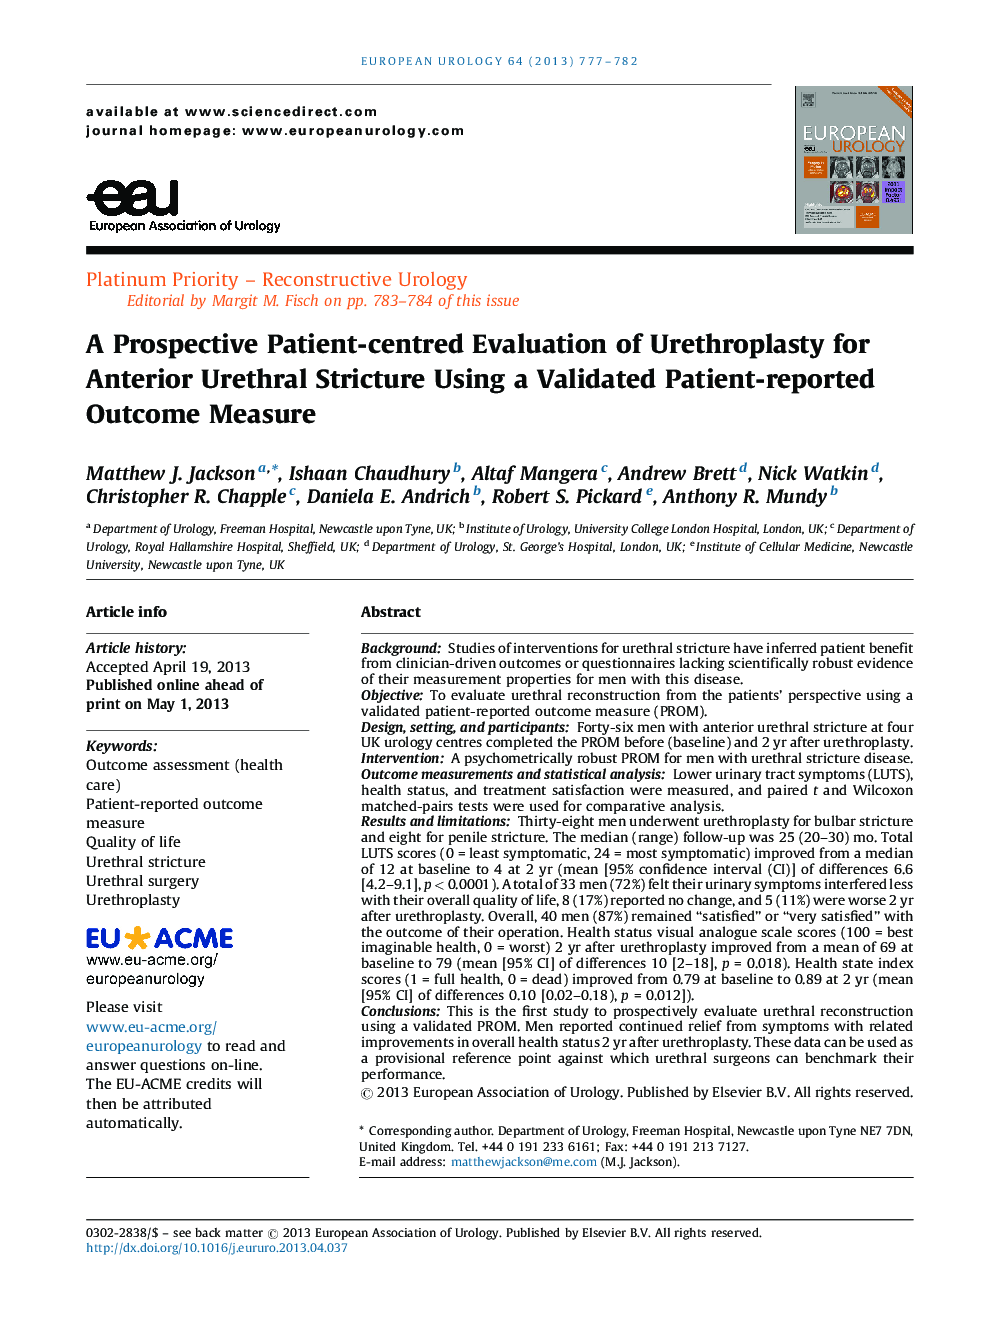 A Prospective Patient-centred Evaluation of Urethroplasty for Anterior Urethral Stricture Using a Validated Patient-reported Outcome Measure